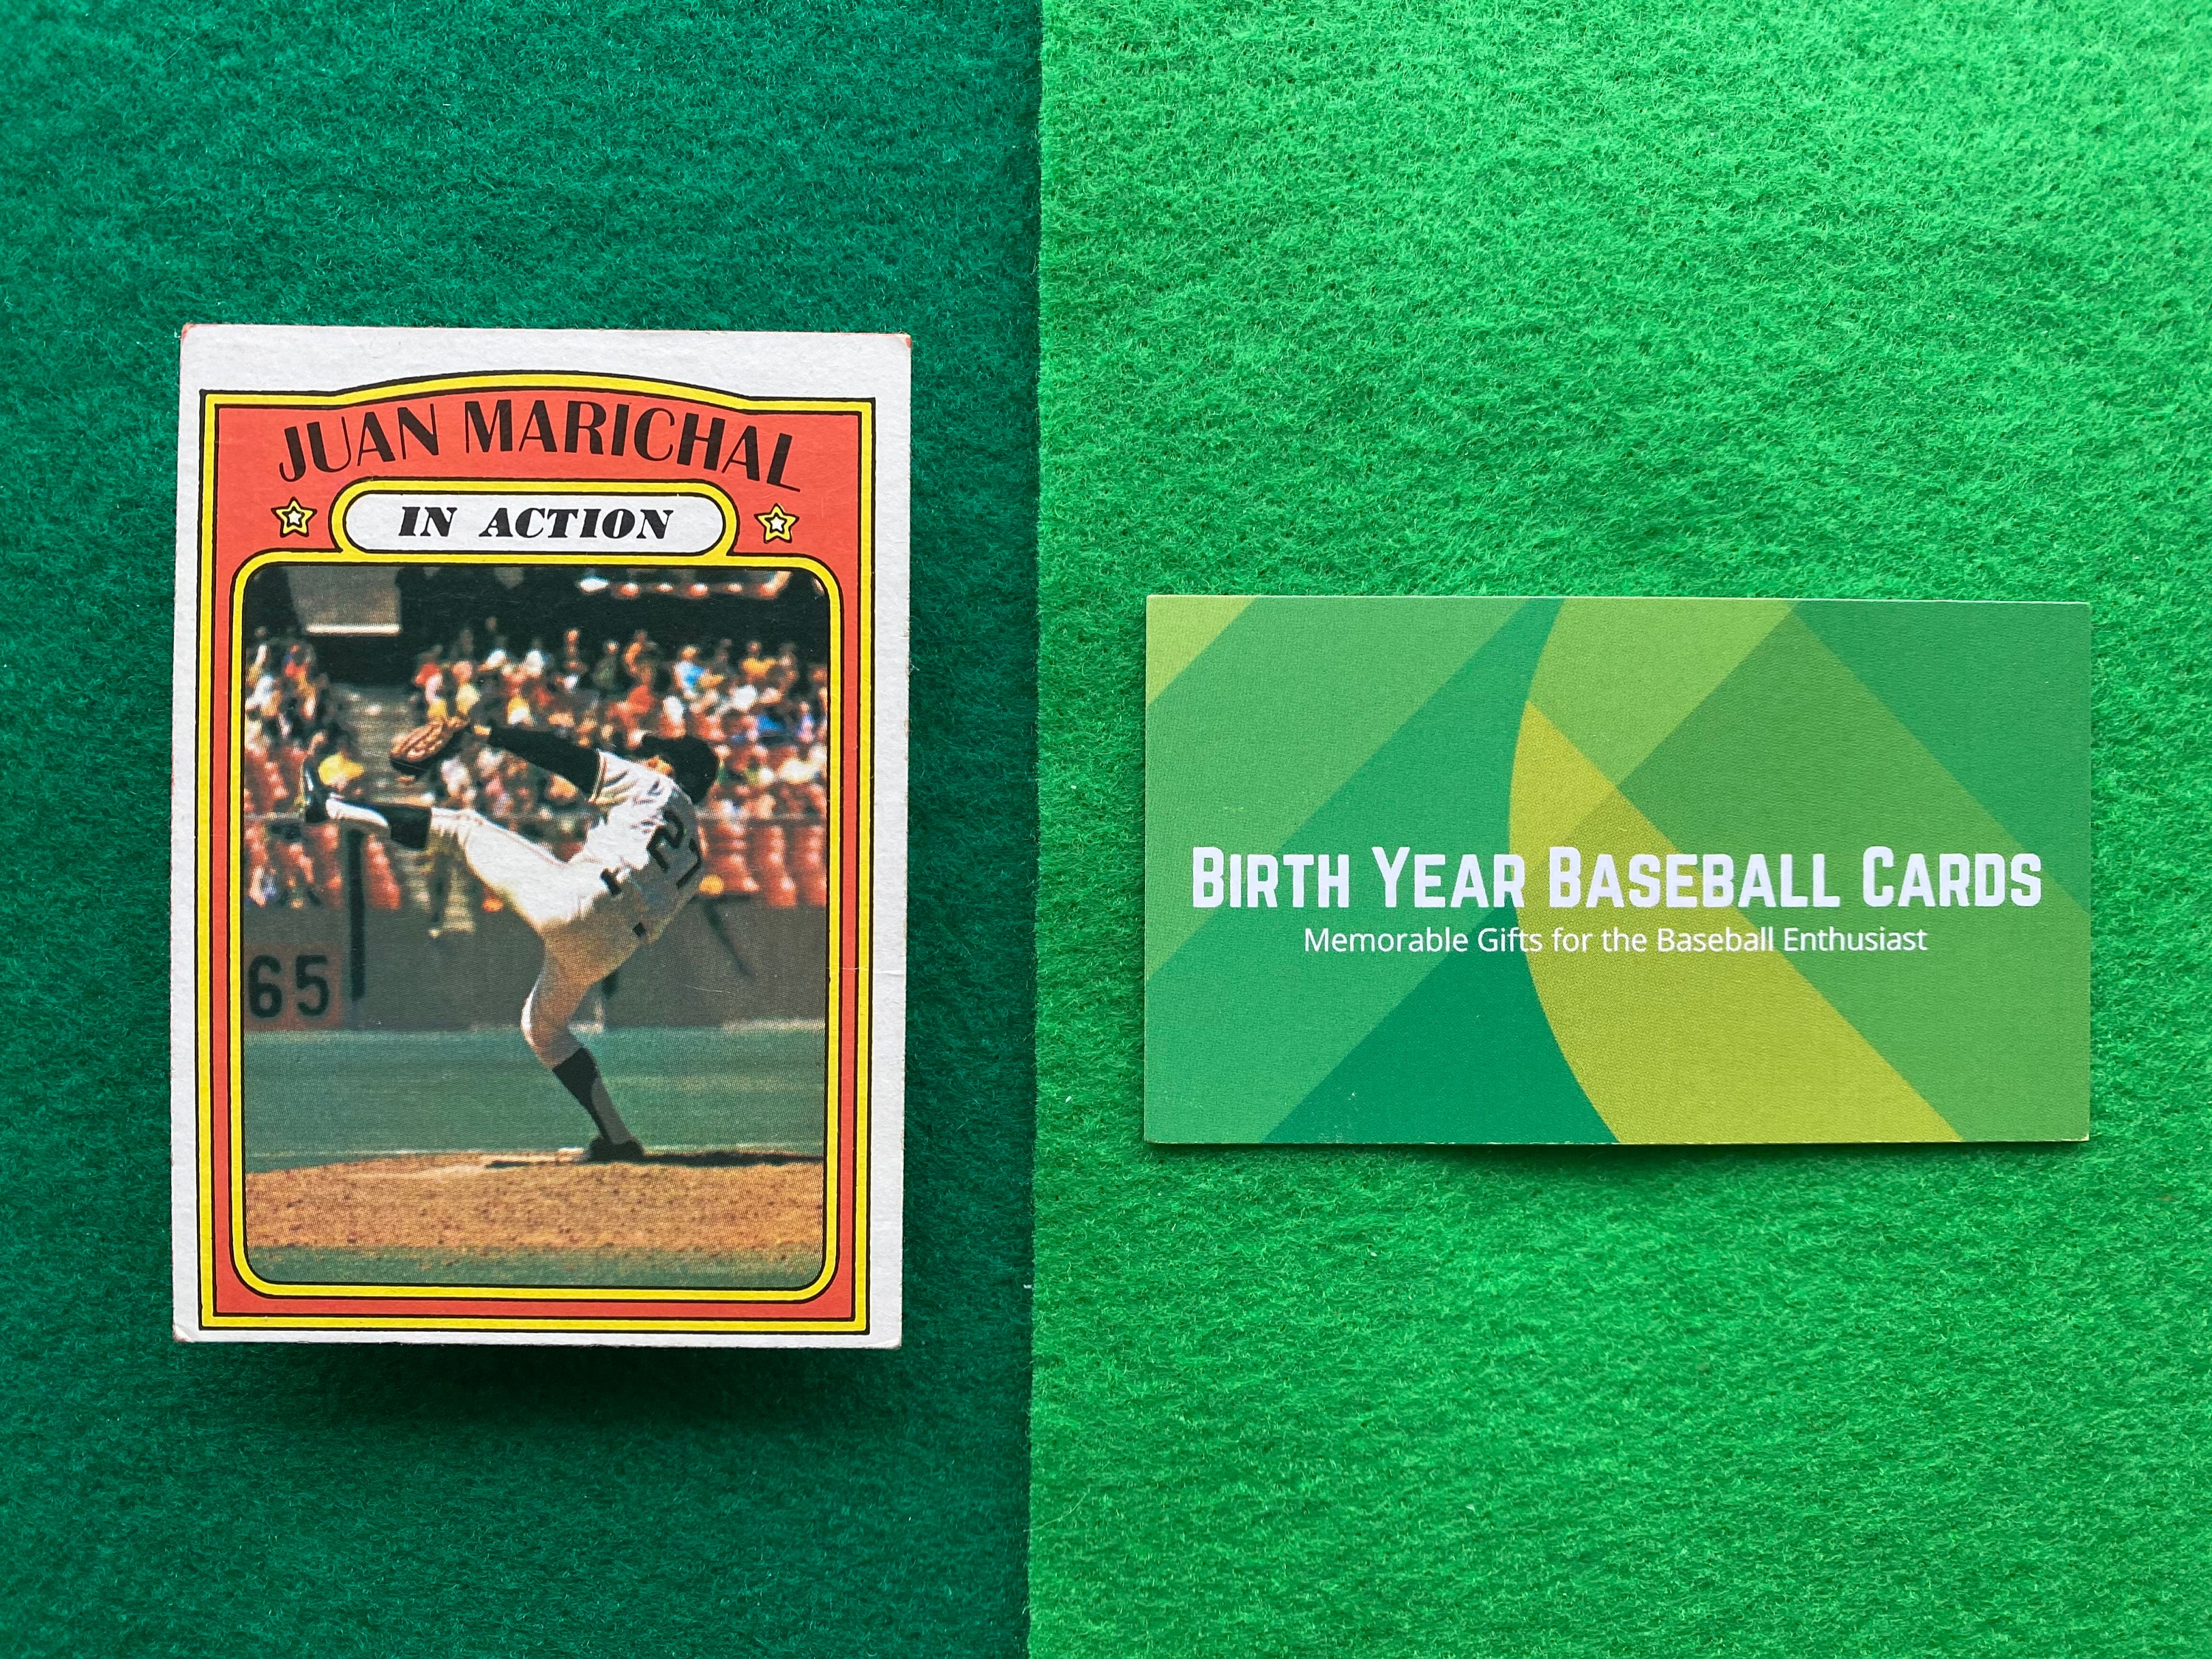 1972 Topps Juan Marichal Card 567 and in Action Card 568 